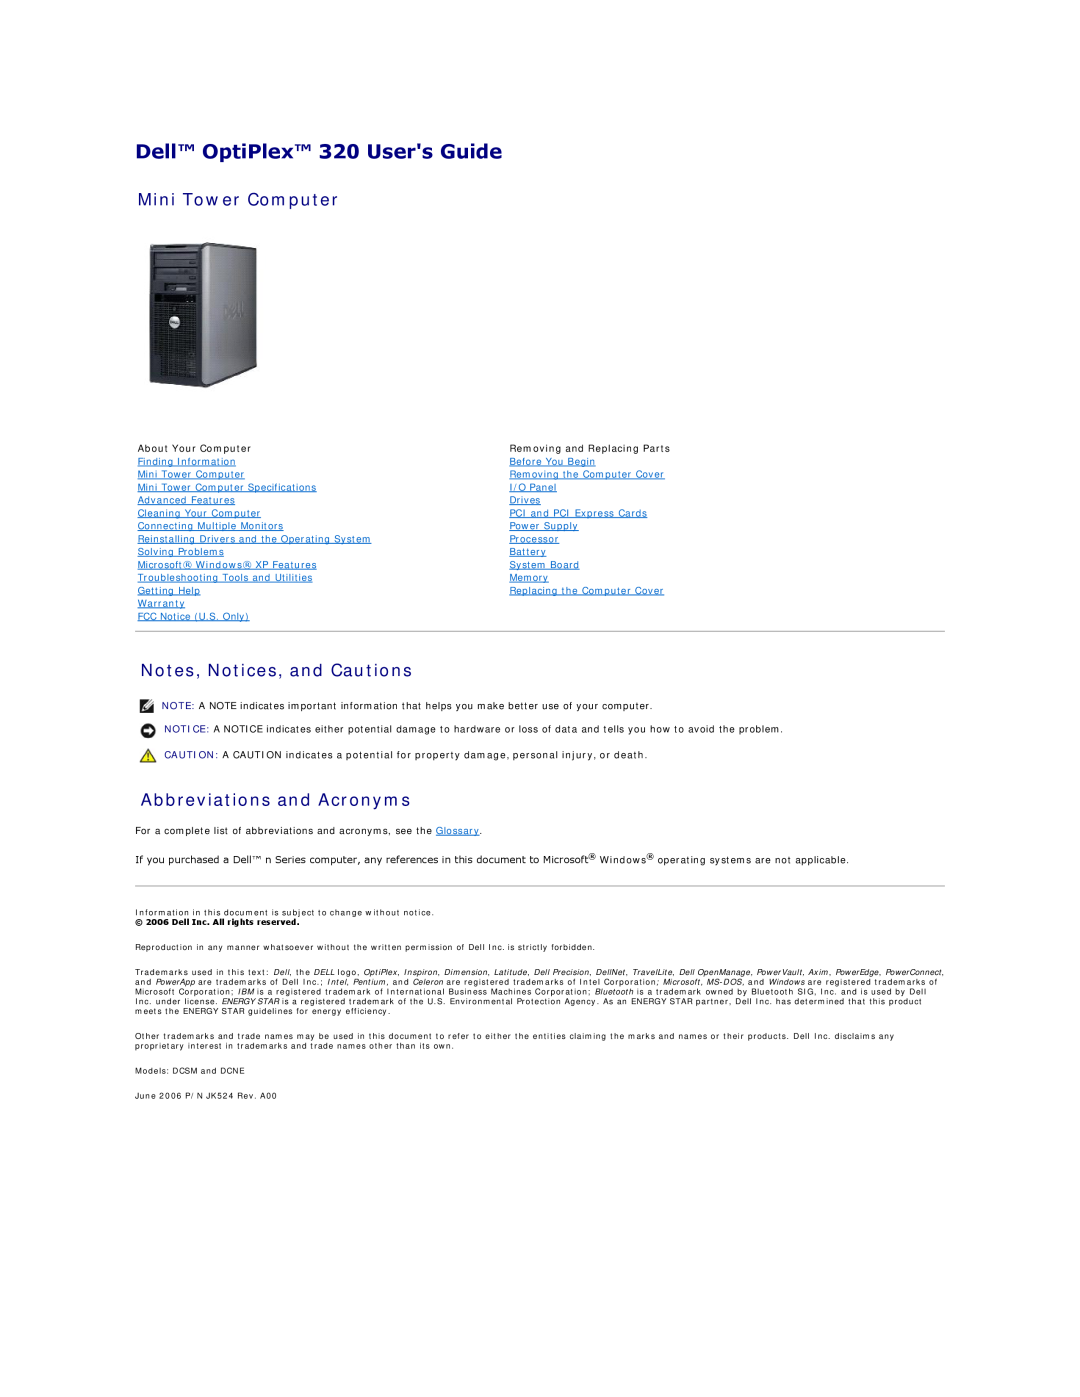 Dell Dell OptiPlex 320 Users Guide, About Your Computer, Removing and Replacing Parts, Finding Information, I/O Panel 